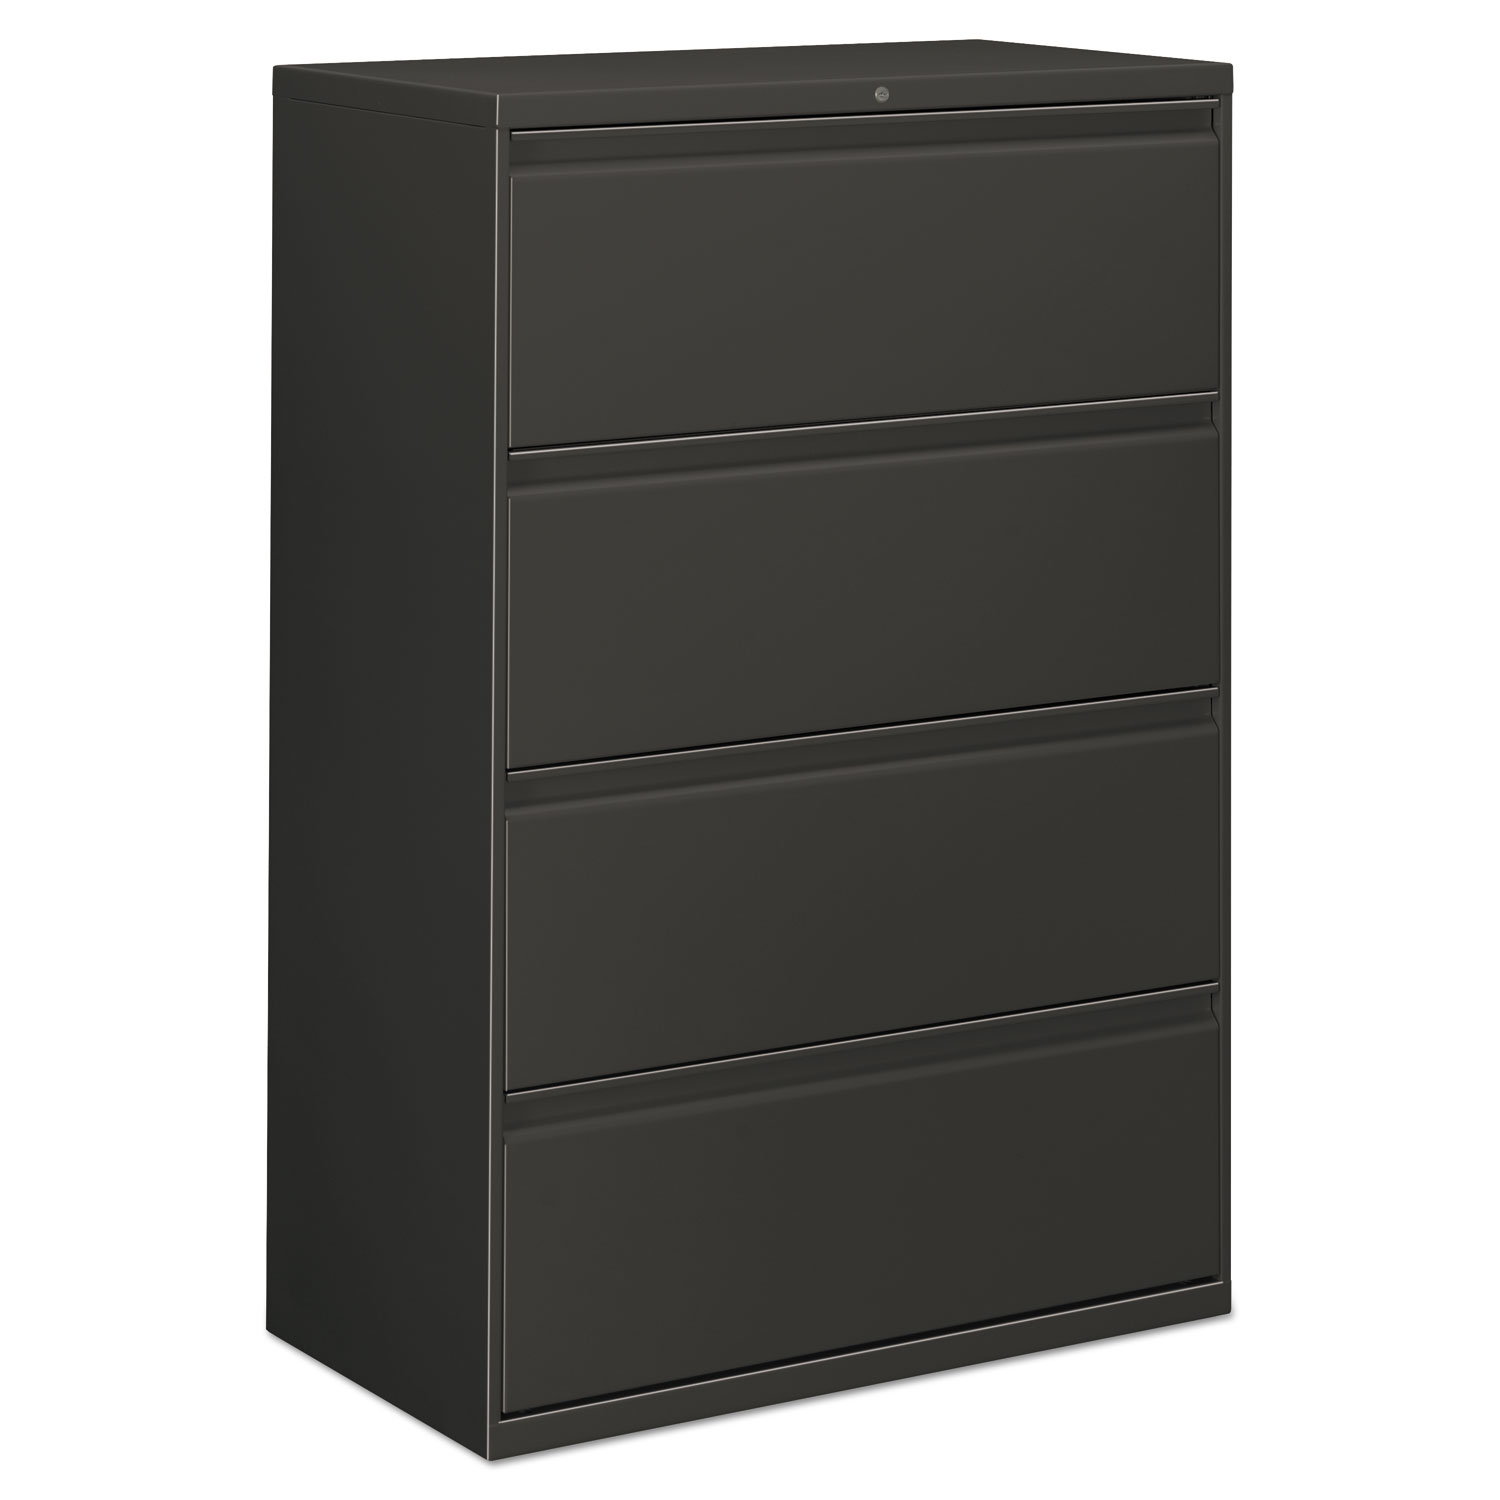 Lateral File, 4 Drawer, 36w x 19.25d x 53.25h, Charcoal